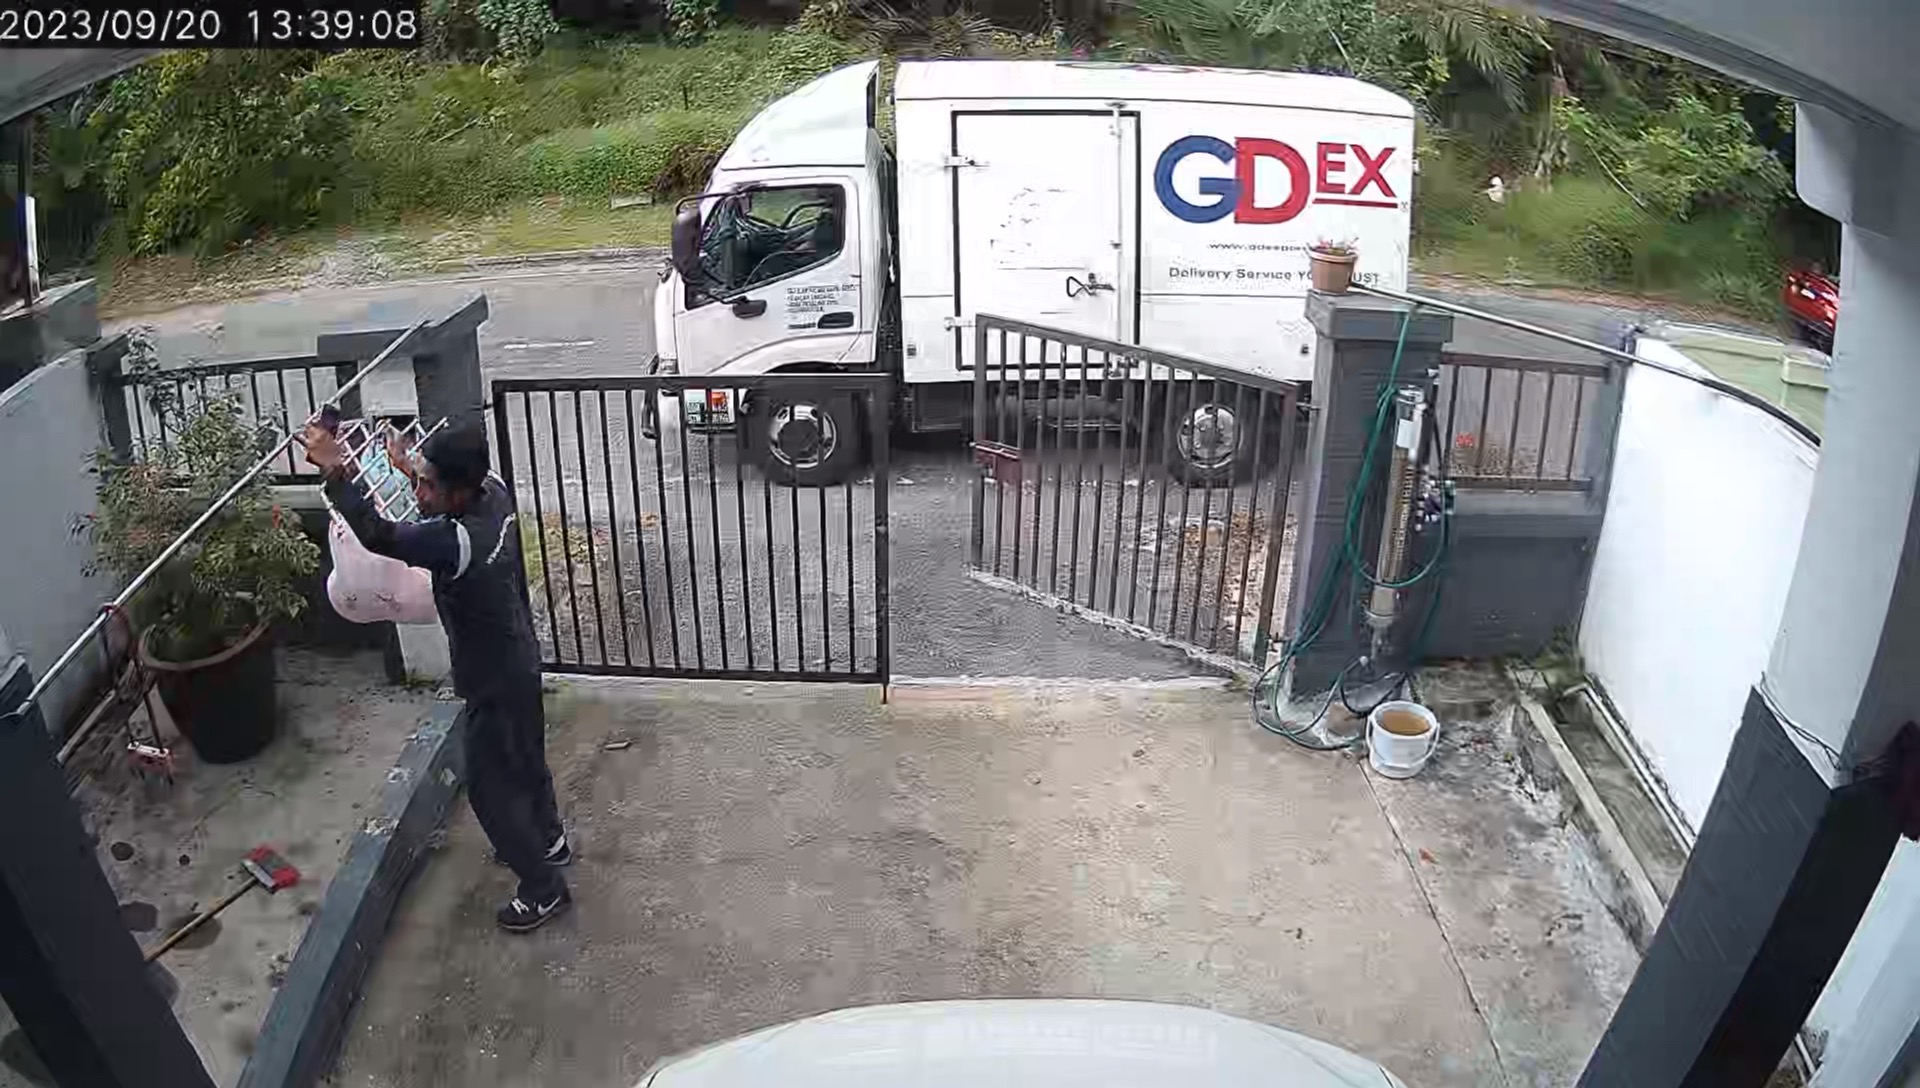 Johor gdex deliveryman praised for keeping customer's stuffed toys before it rained | weirdkaya